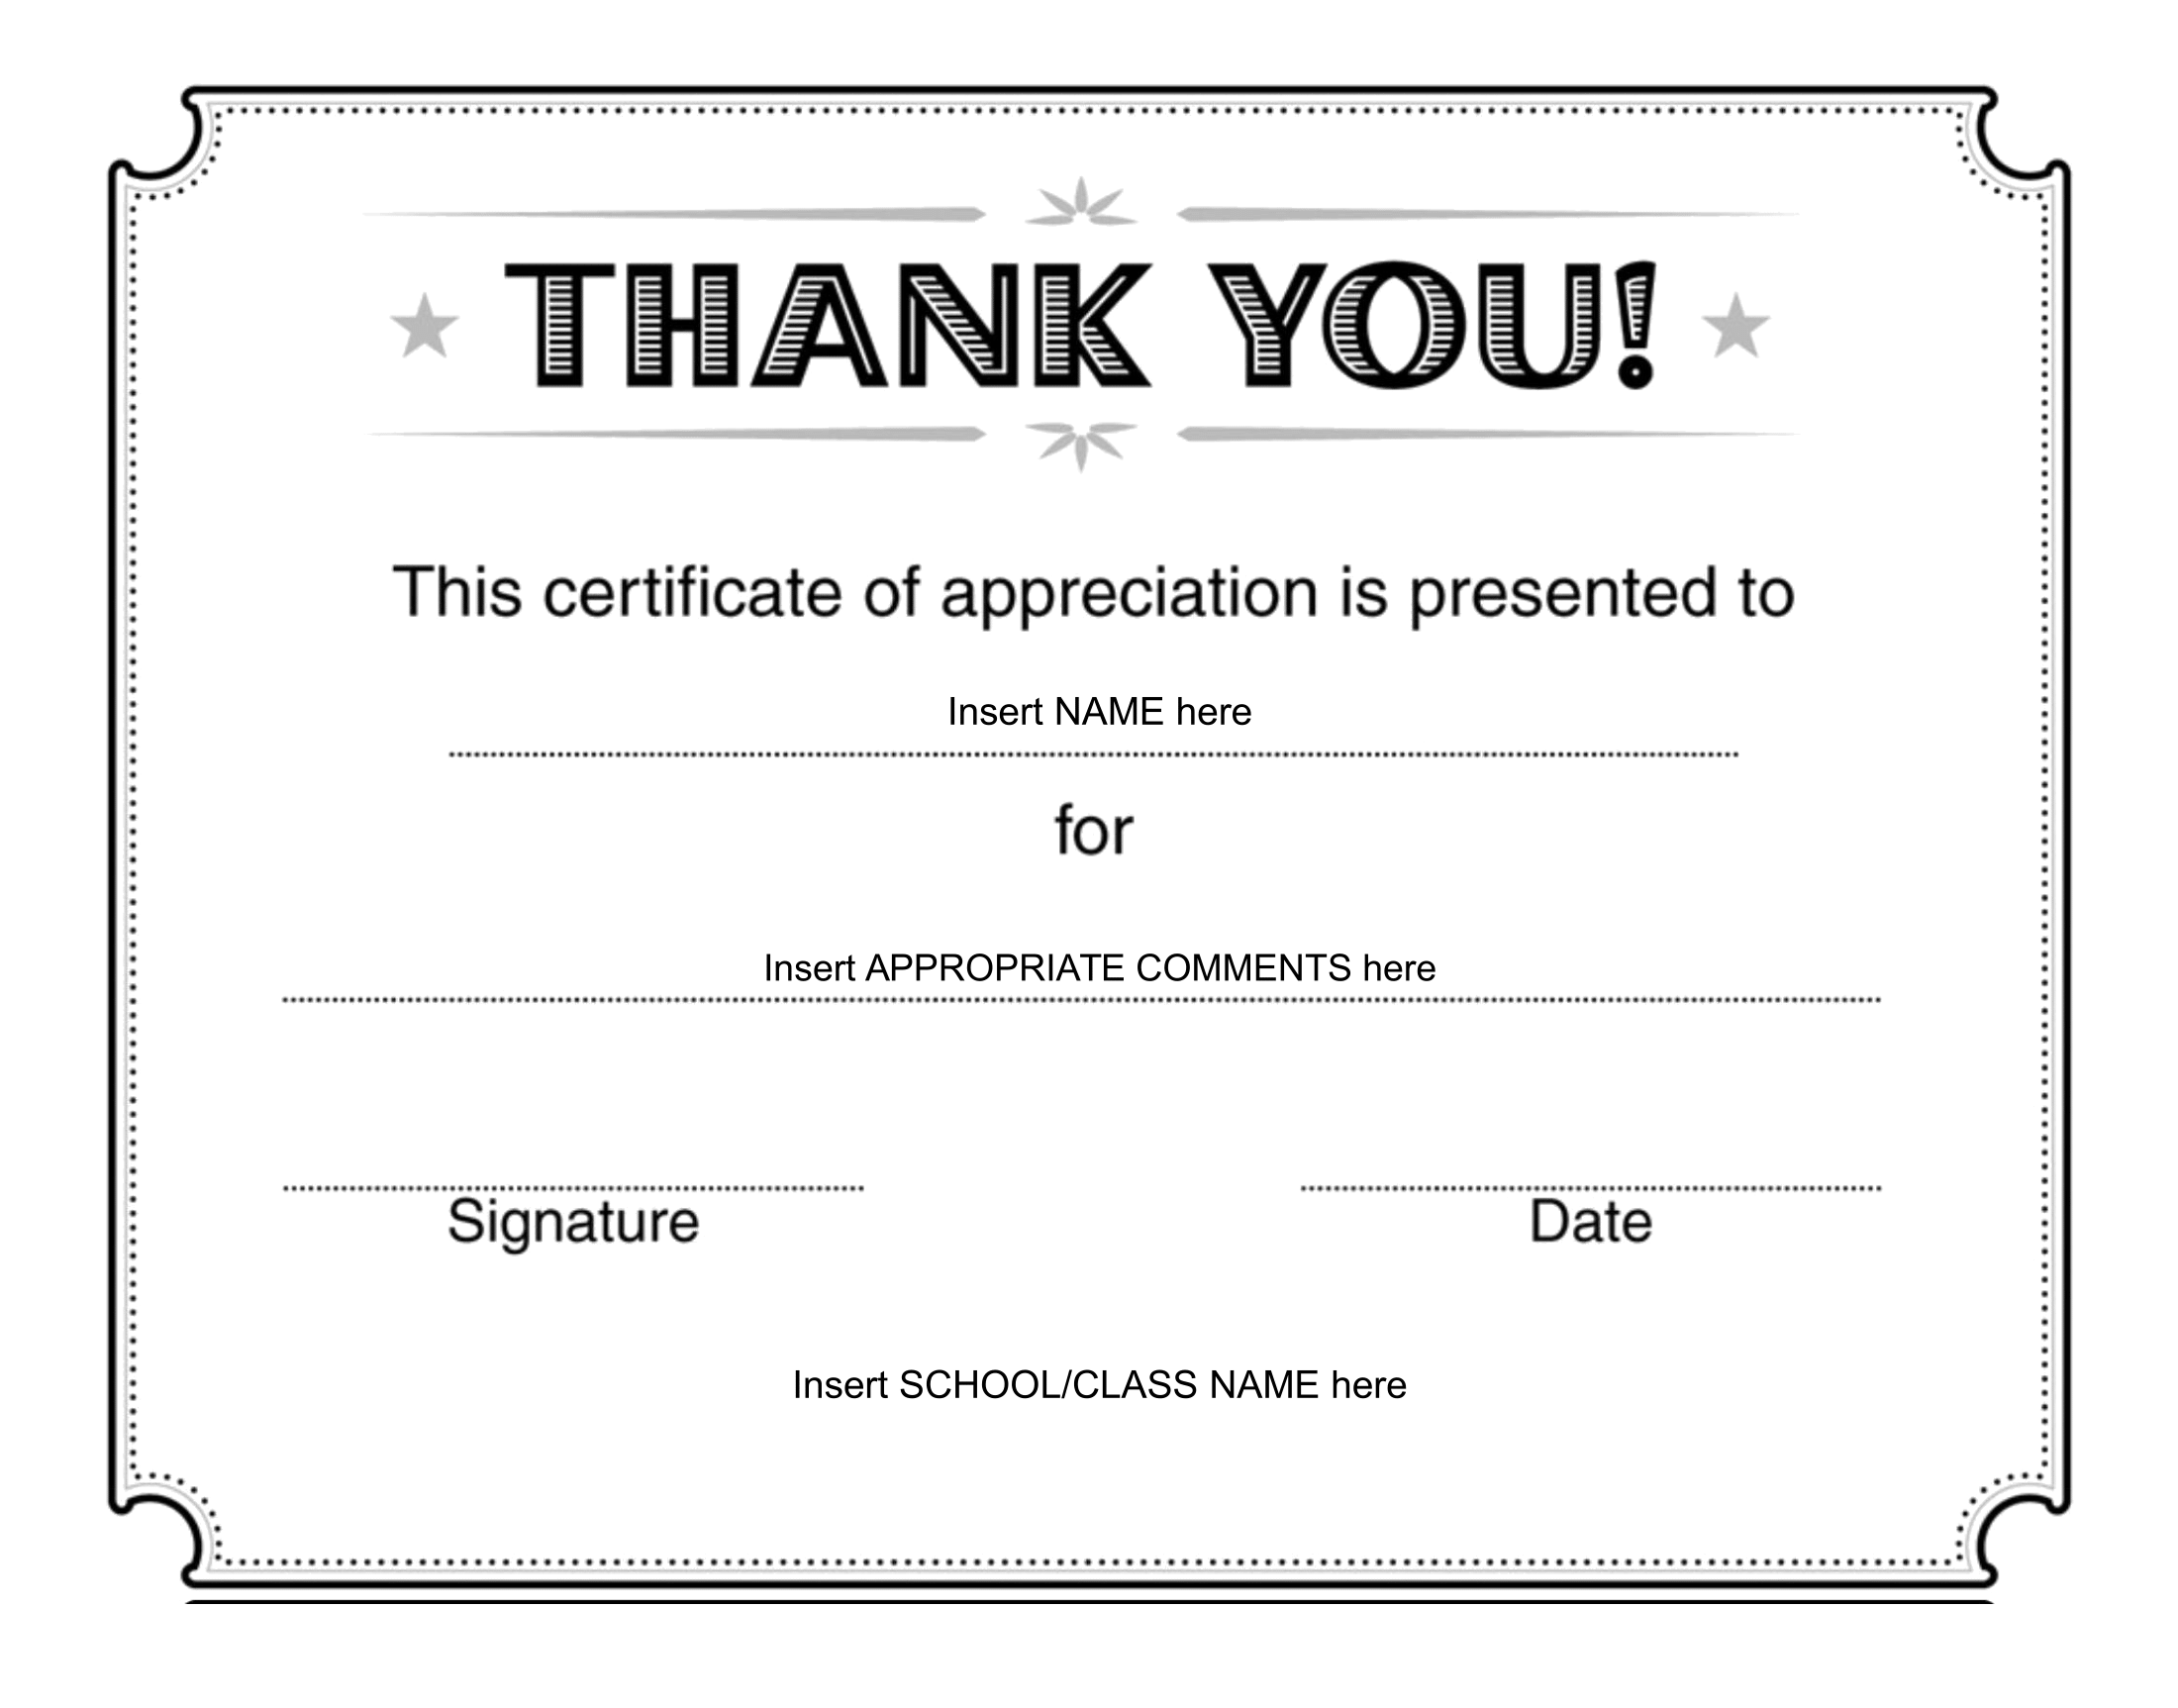 Thank You Certificate Download Free Template